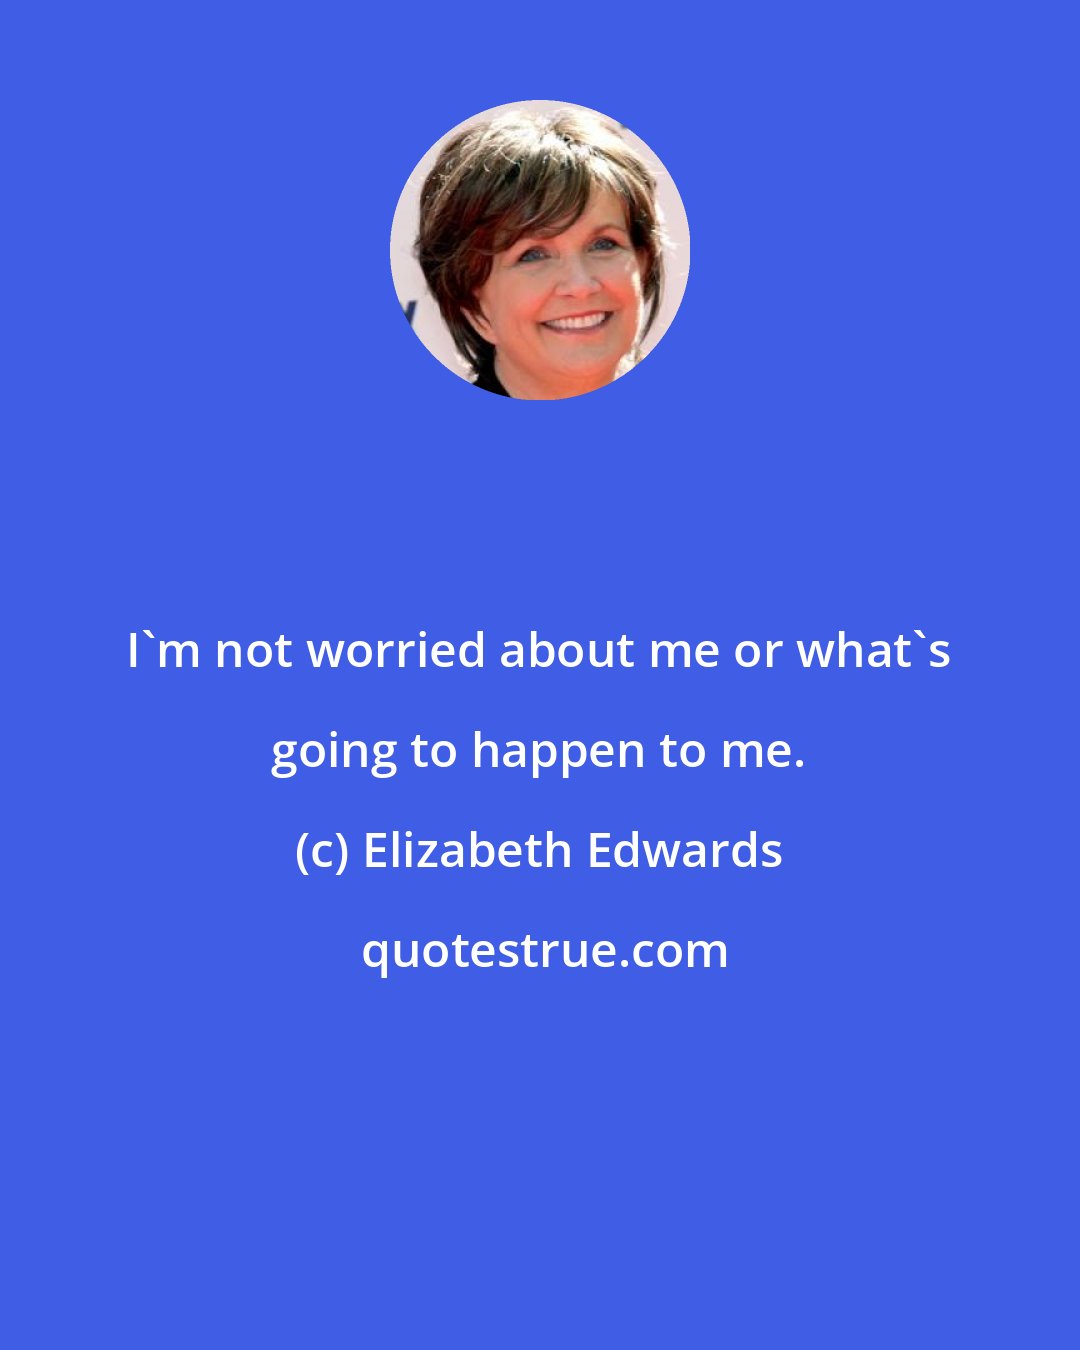 Elizabeth Edwards: I'm not worried about me or what's going to happen to me.